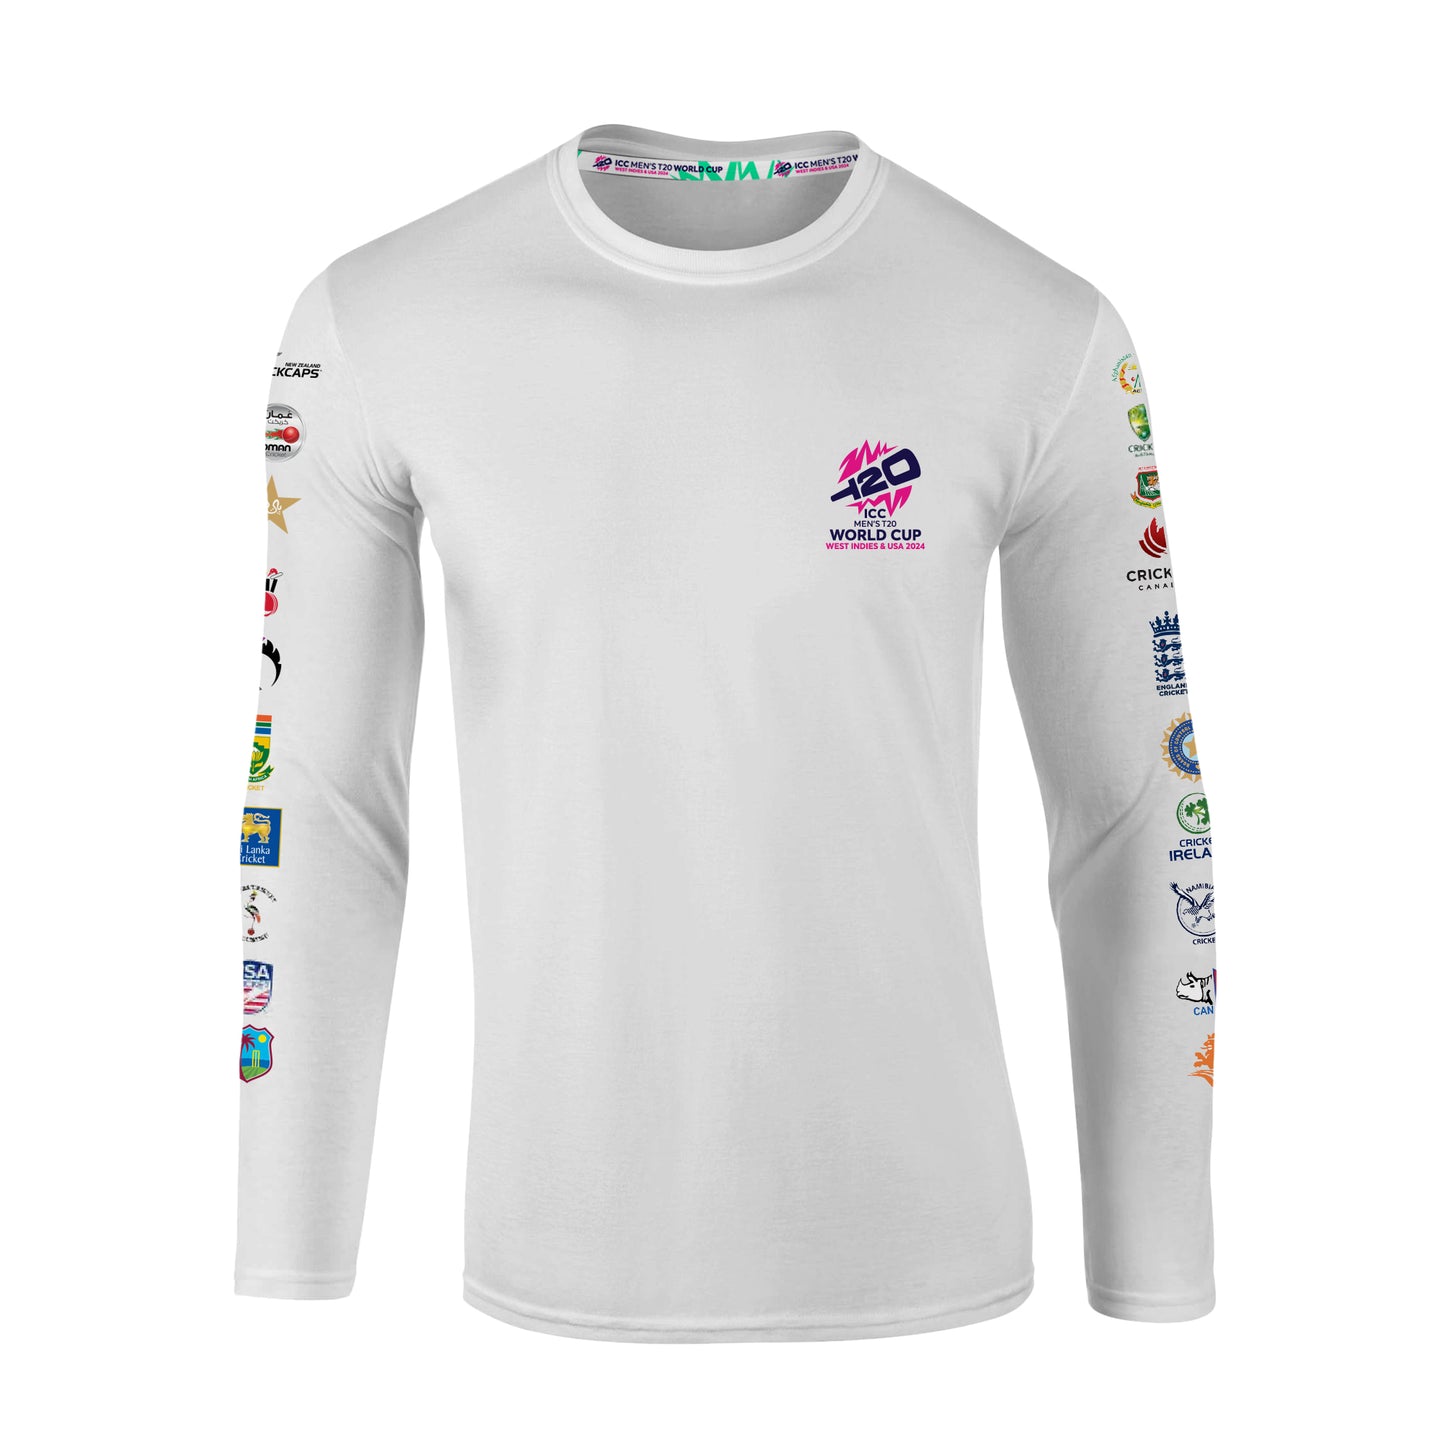 ICC T20 World Cup All Nations White Longsleeve